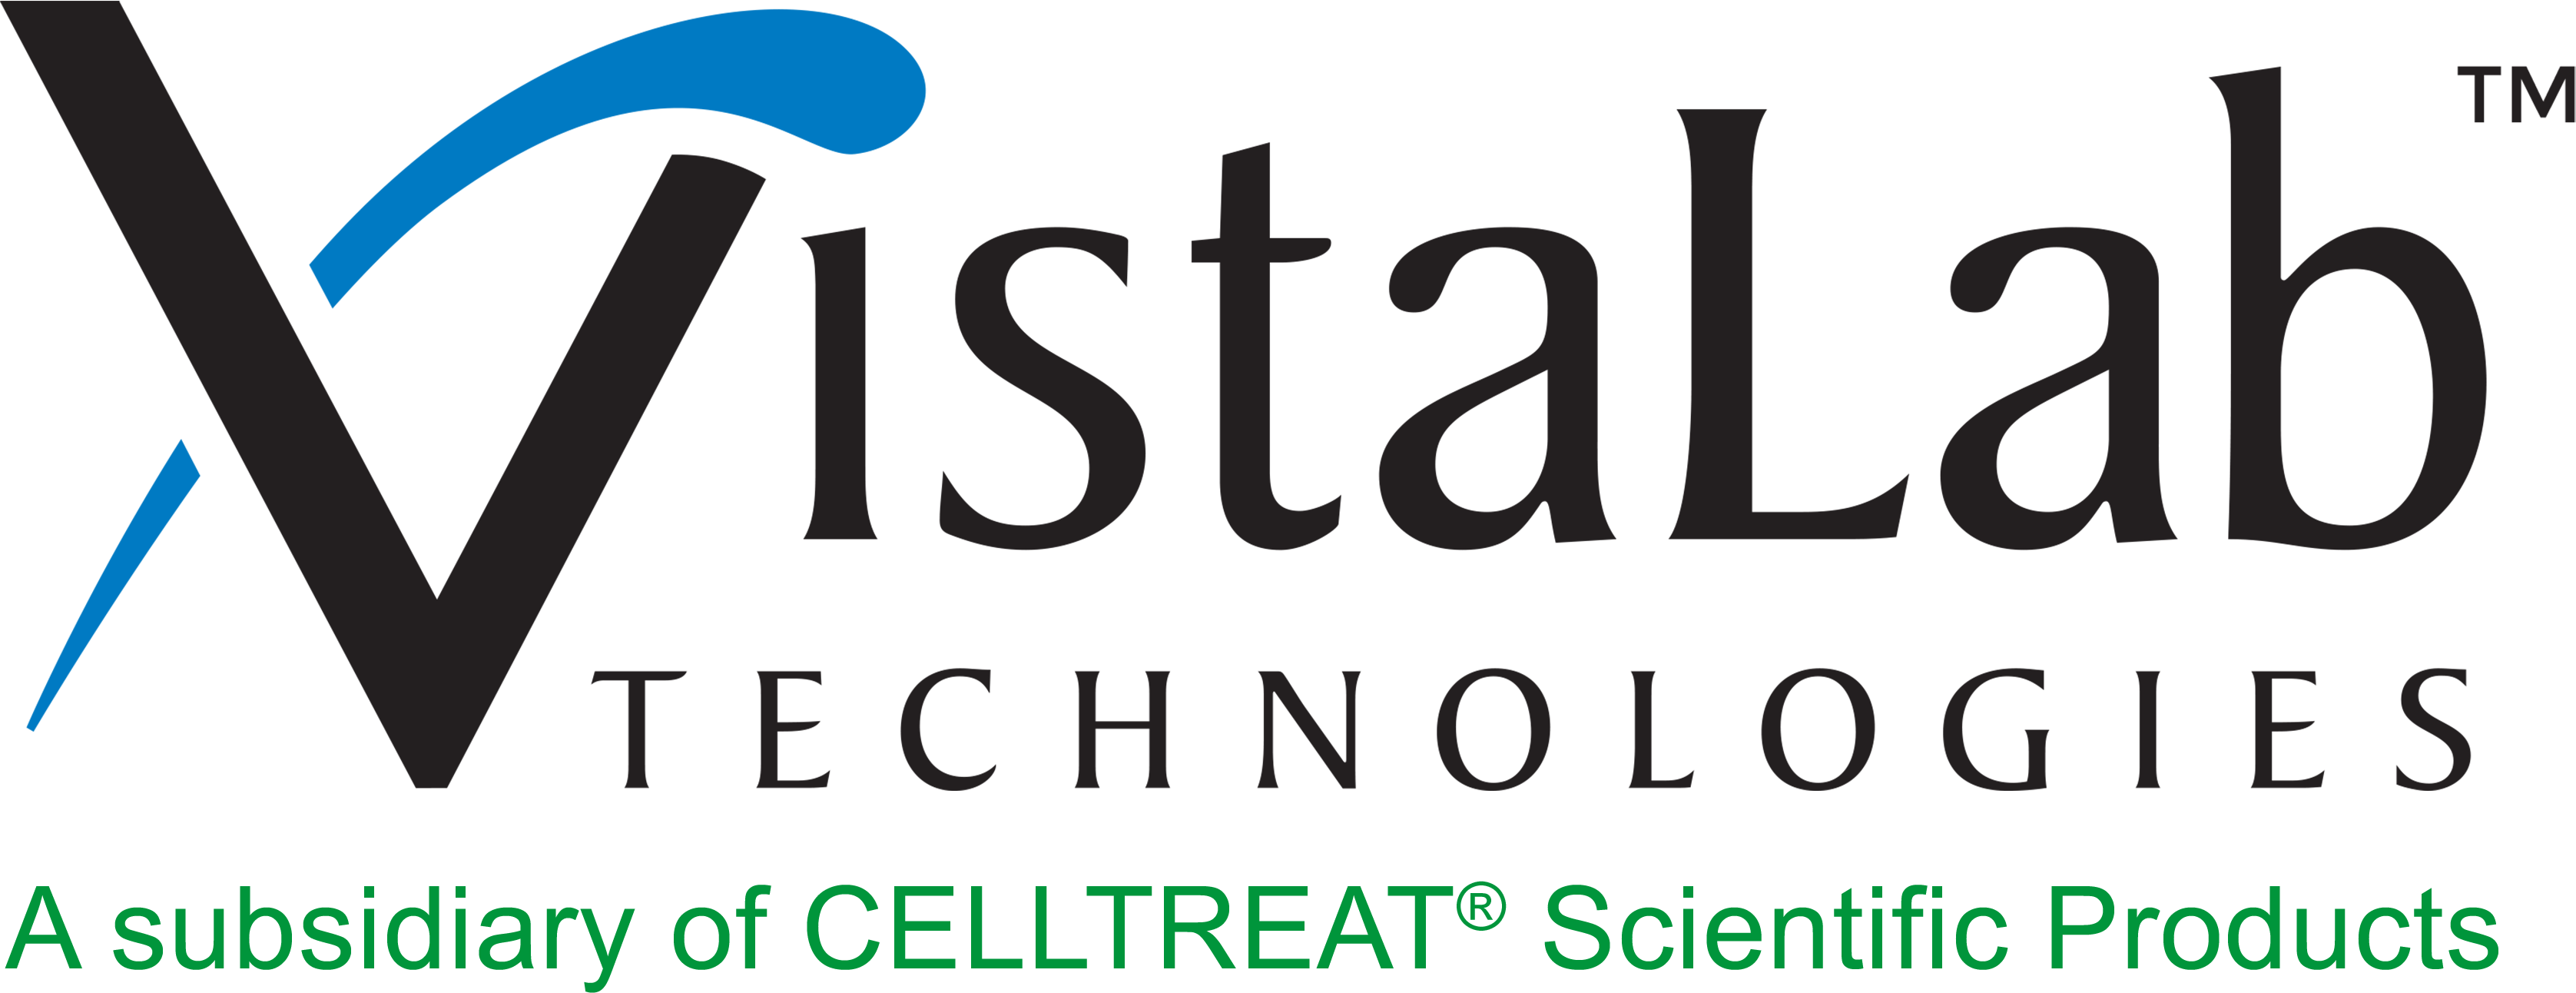 CELLTREAT Scientific Products